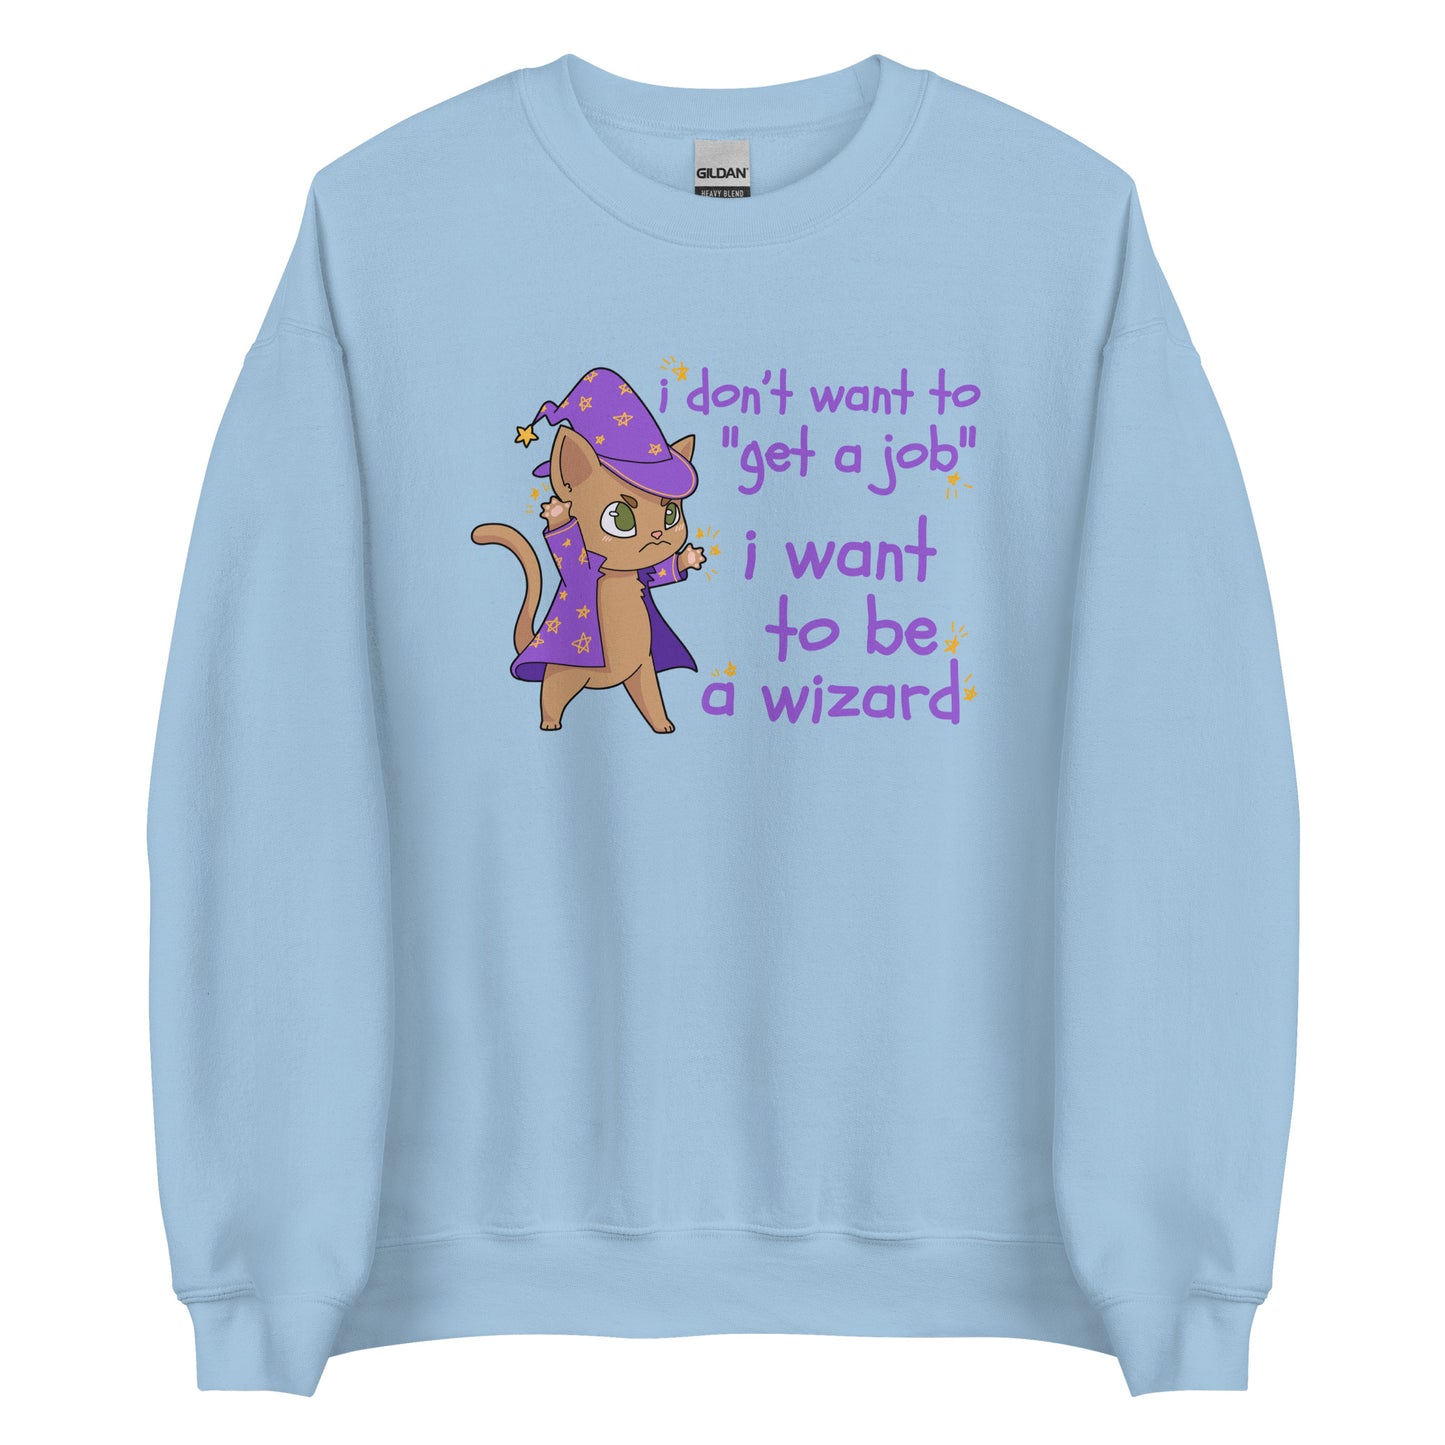 A light blue crewneck sweatshirt featuring an illustration of a small cat wearing wizard robes and a hat. Text alongside the cat reads "i don't want to "get a job". i want to be a wizard."